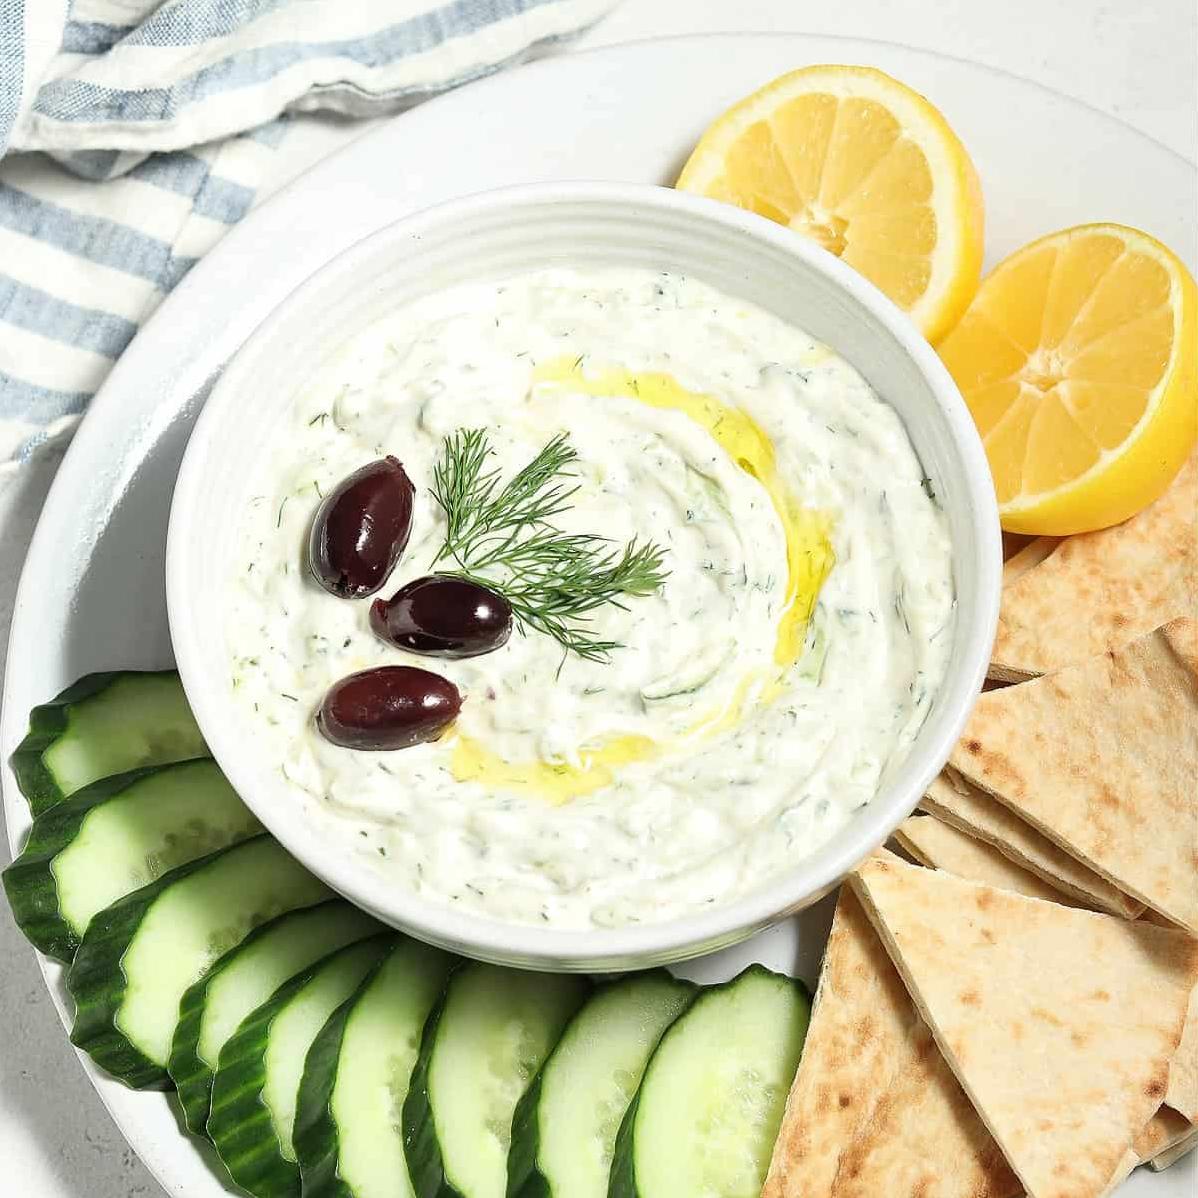  This zesty, tangy, herby creation is a must-try for Vegan Tzatziki lovers.